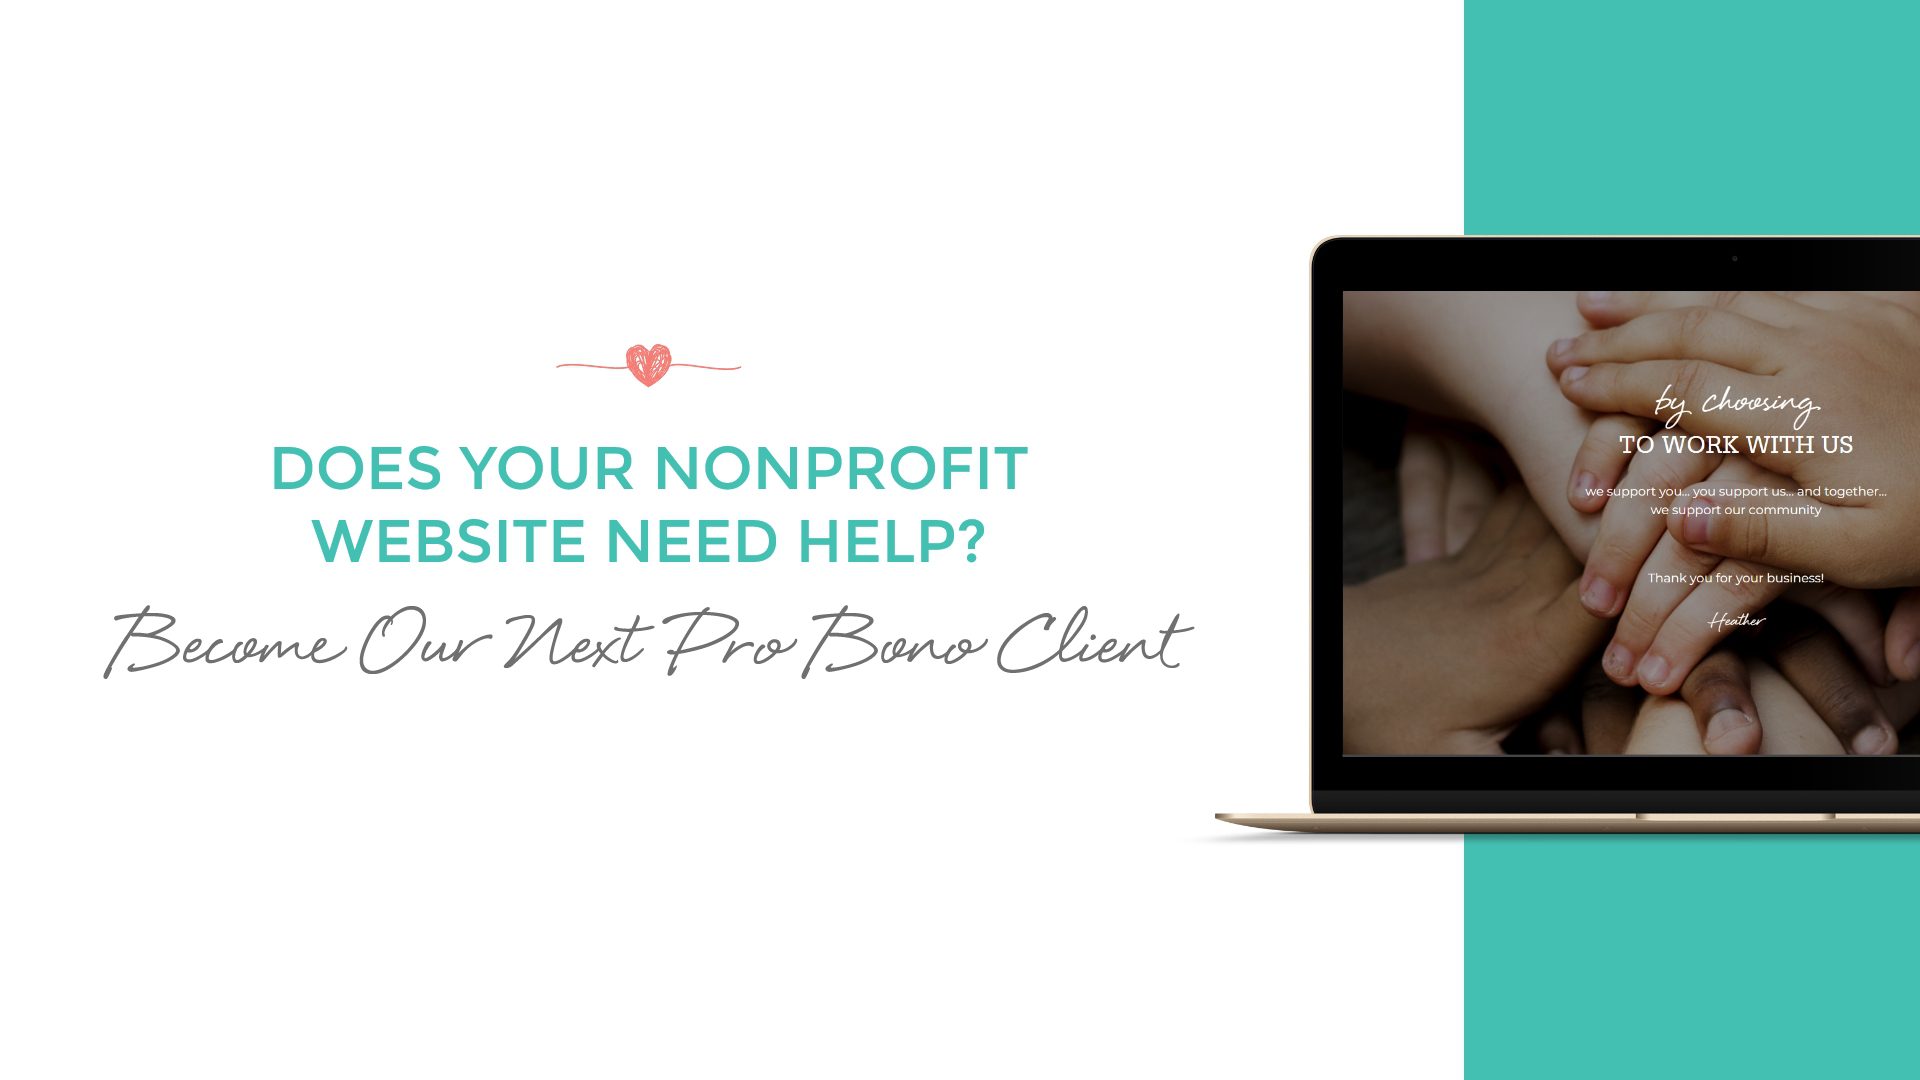 Does your nonprofit website need help? Be our next pro bono client.